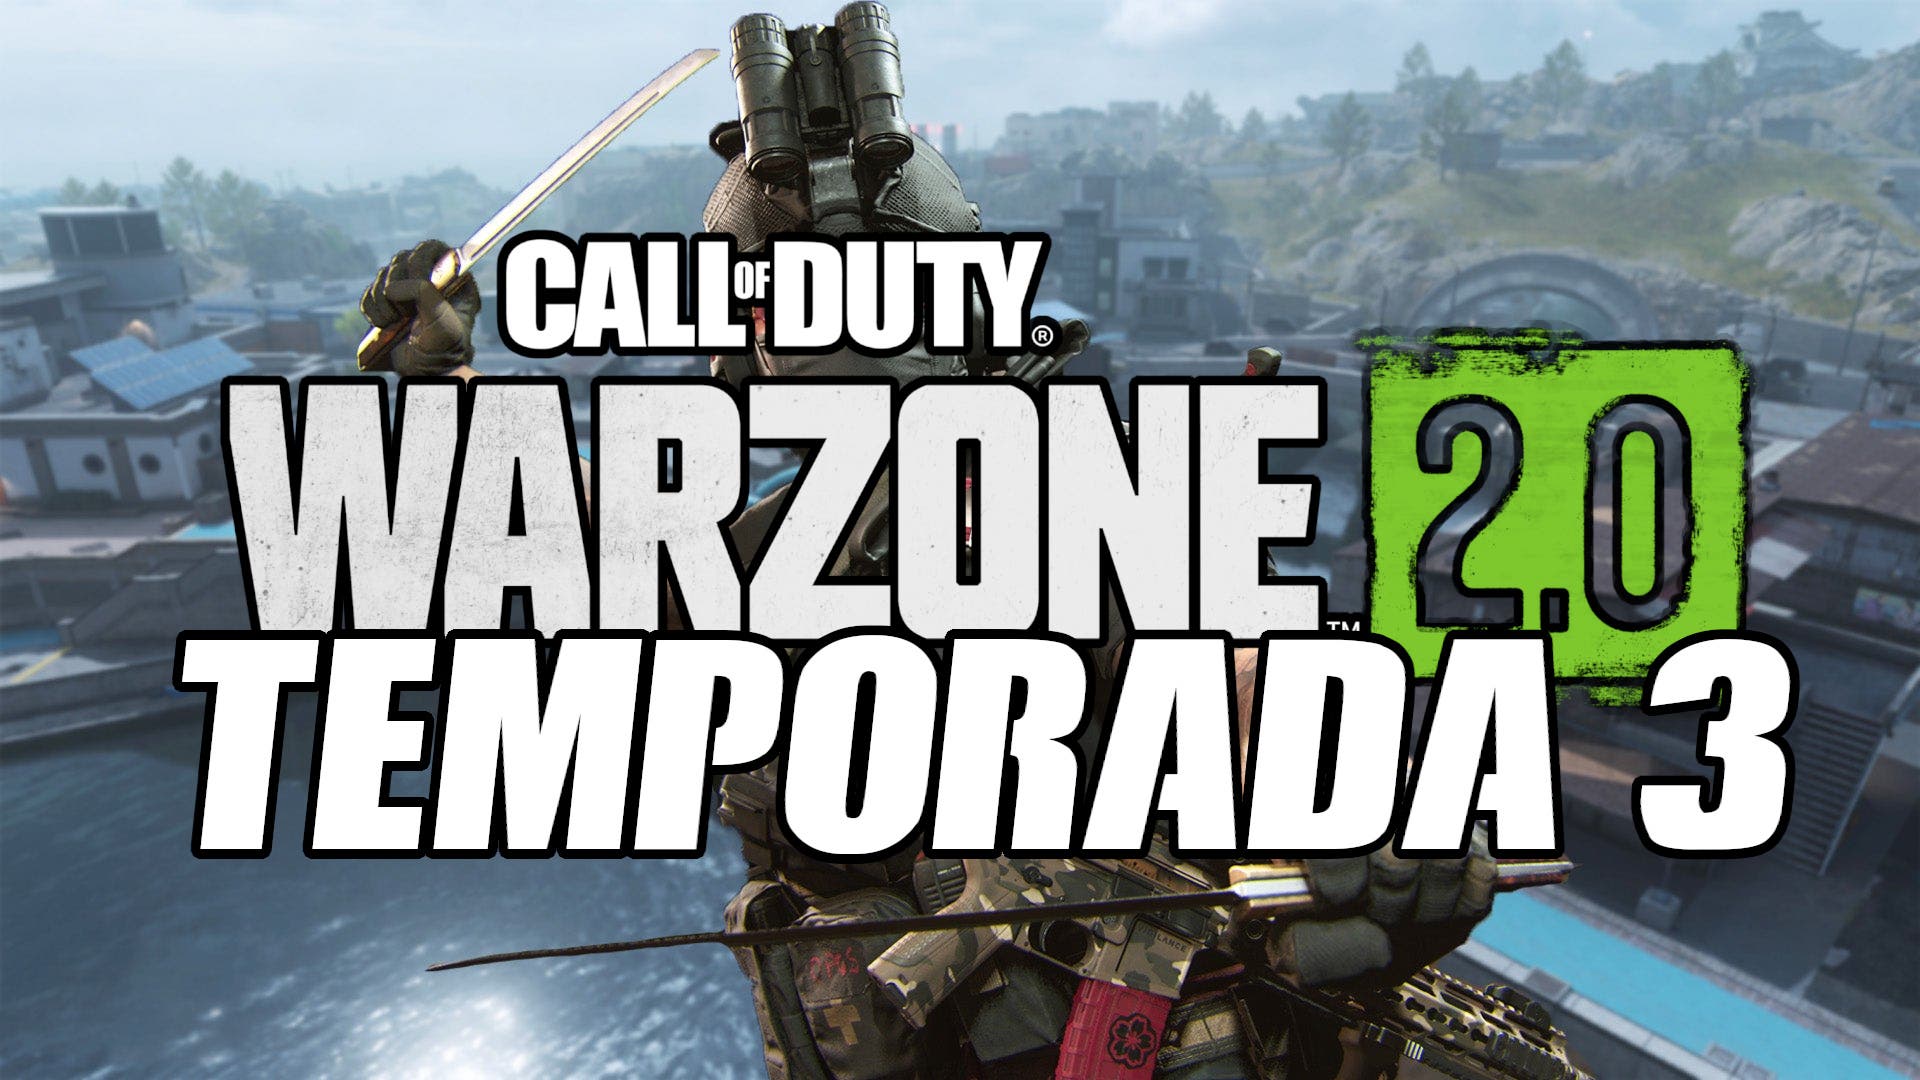 Modern Warfare 2 and Warzone 2 reveal highly anticipated information on Seasons 2 and 3